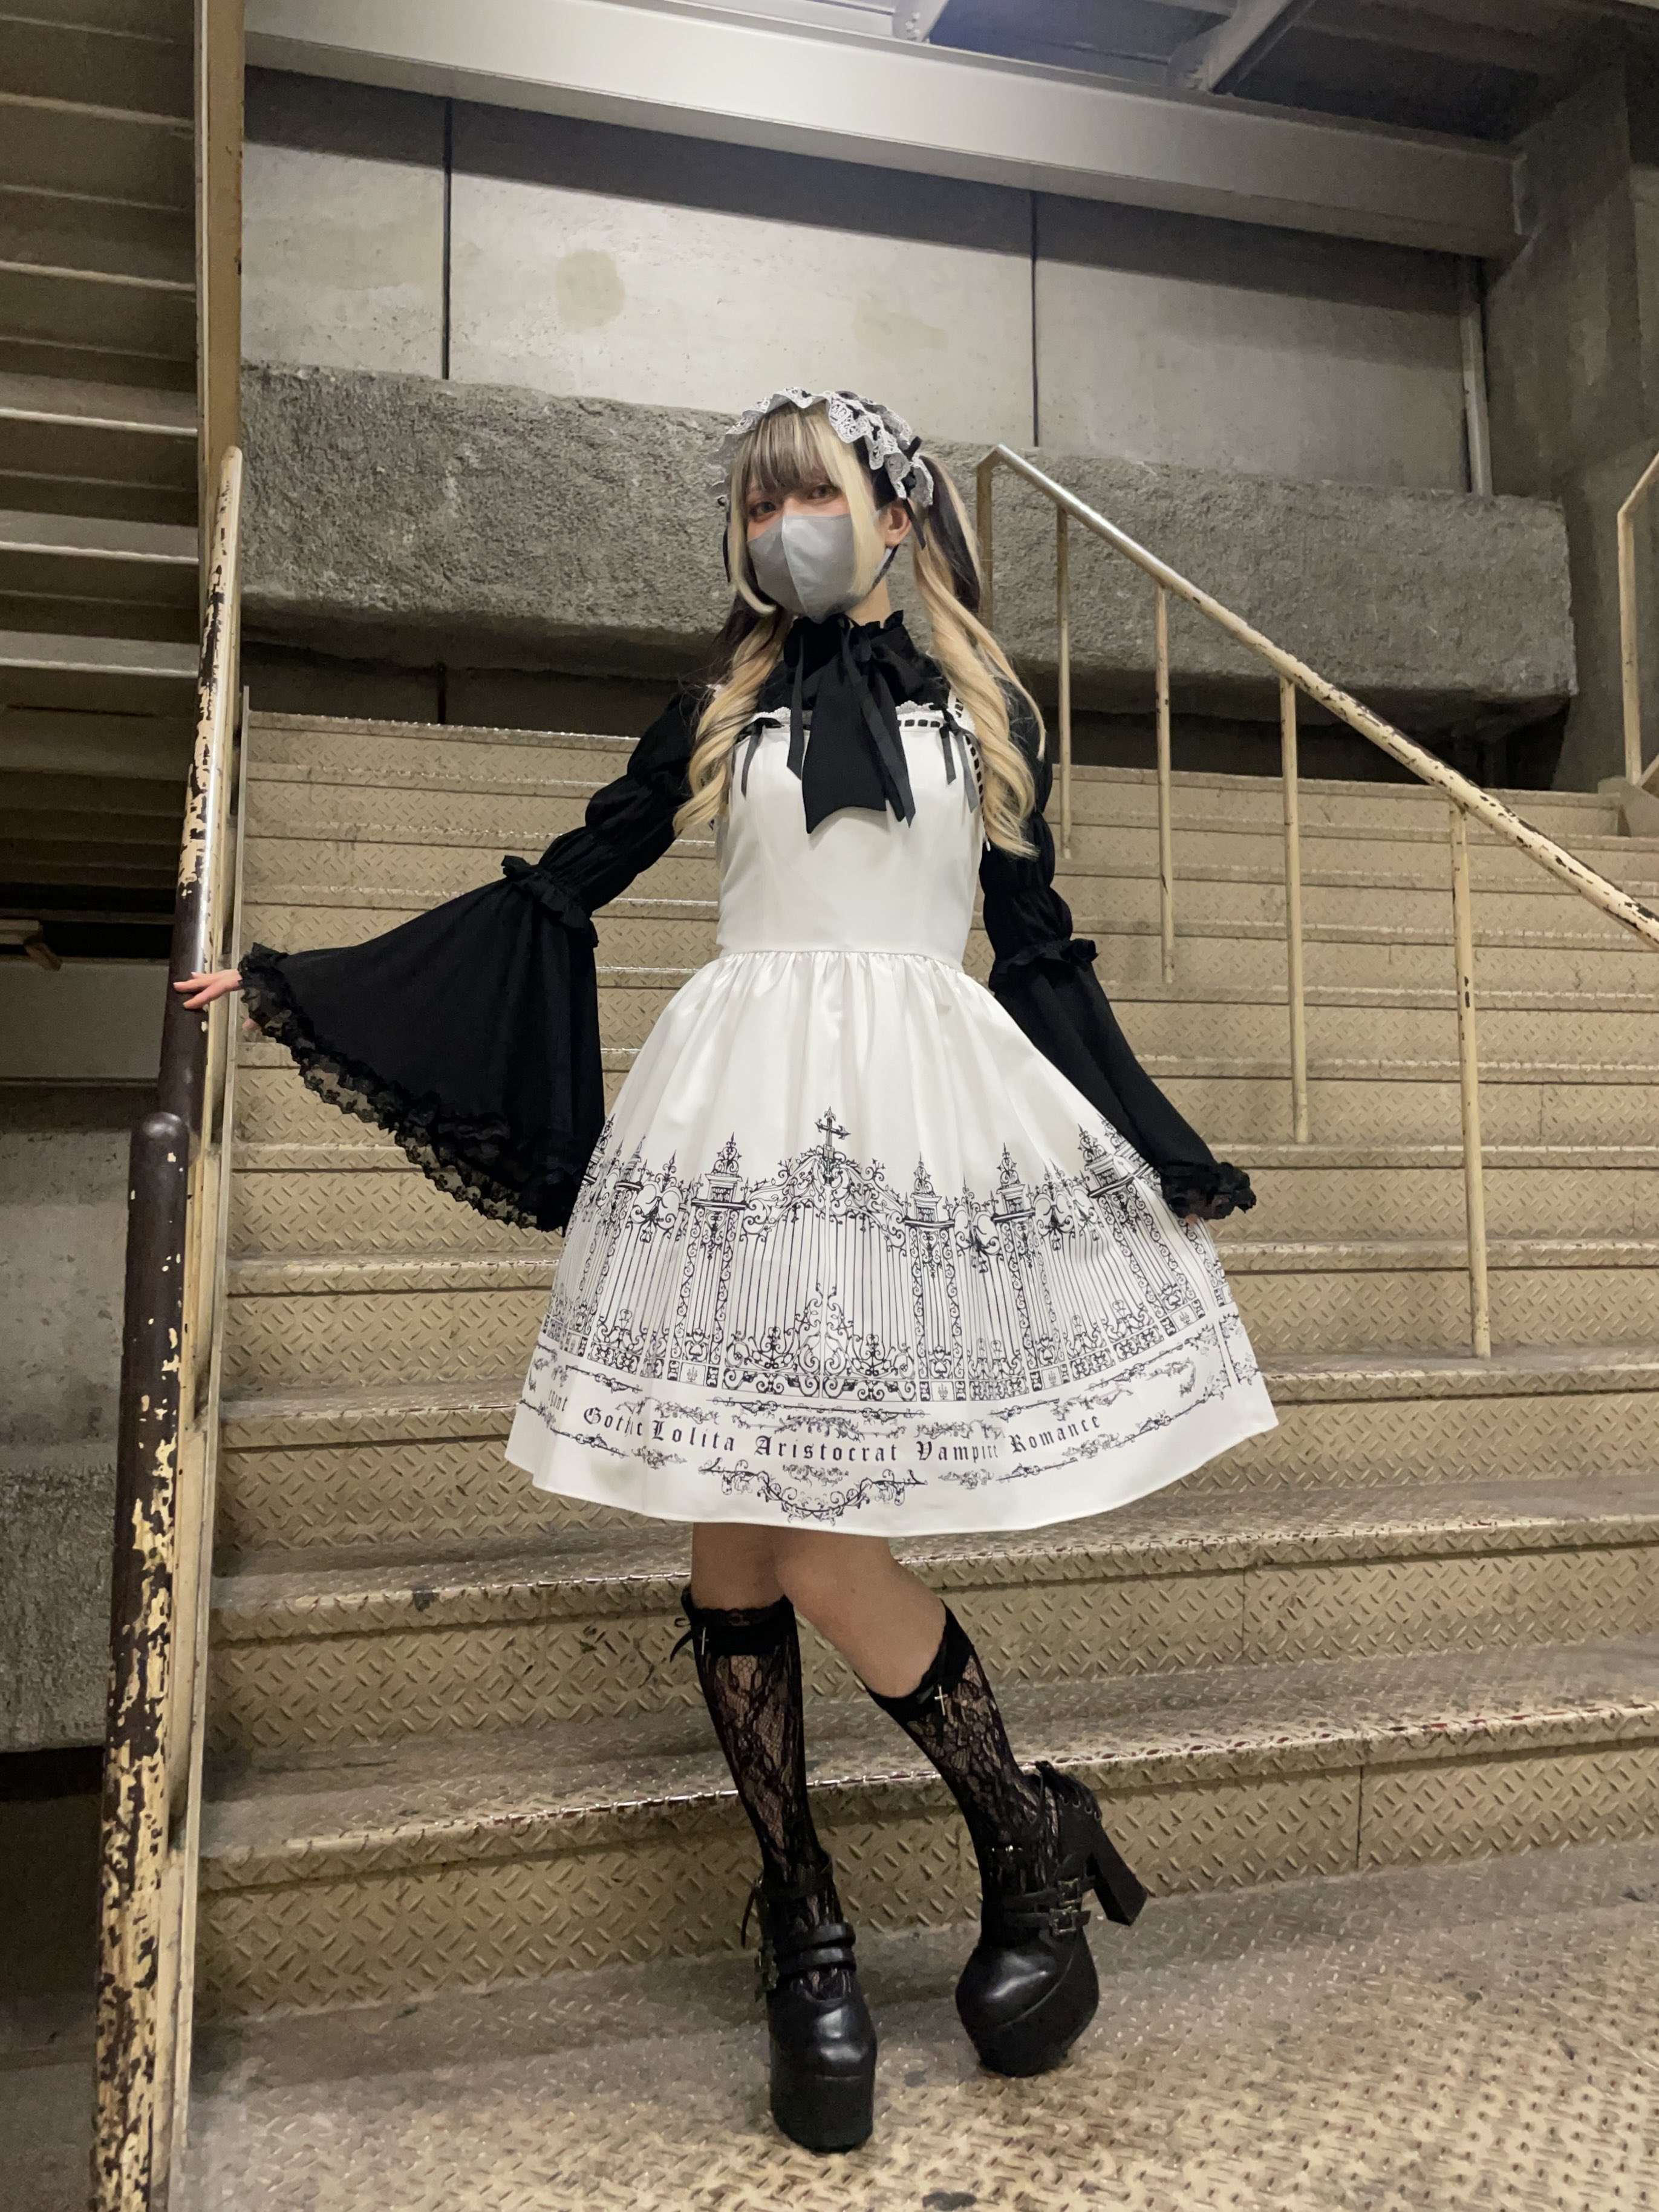 Satsuki from the Atelier Pierrot Harajuku store staff, wearing the Moi Meme Moitie Iron Gate JSK in white with a black petticoat. The black petticoat is not visible through the white fabric, demonstrating that the fabric is fully opaque.